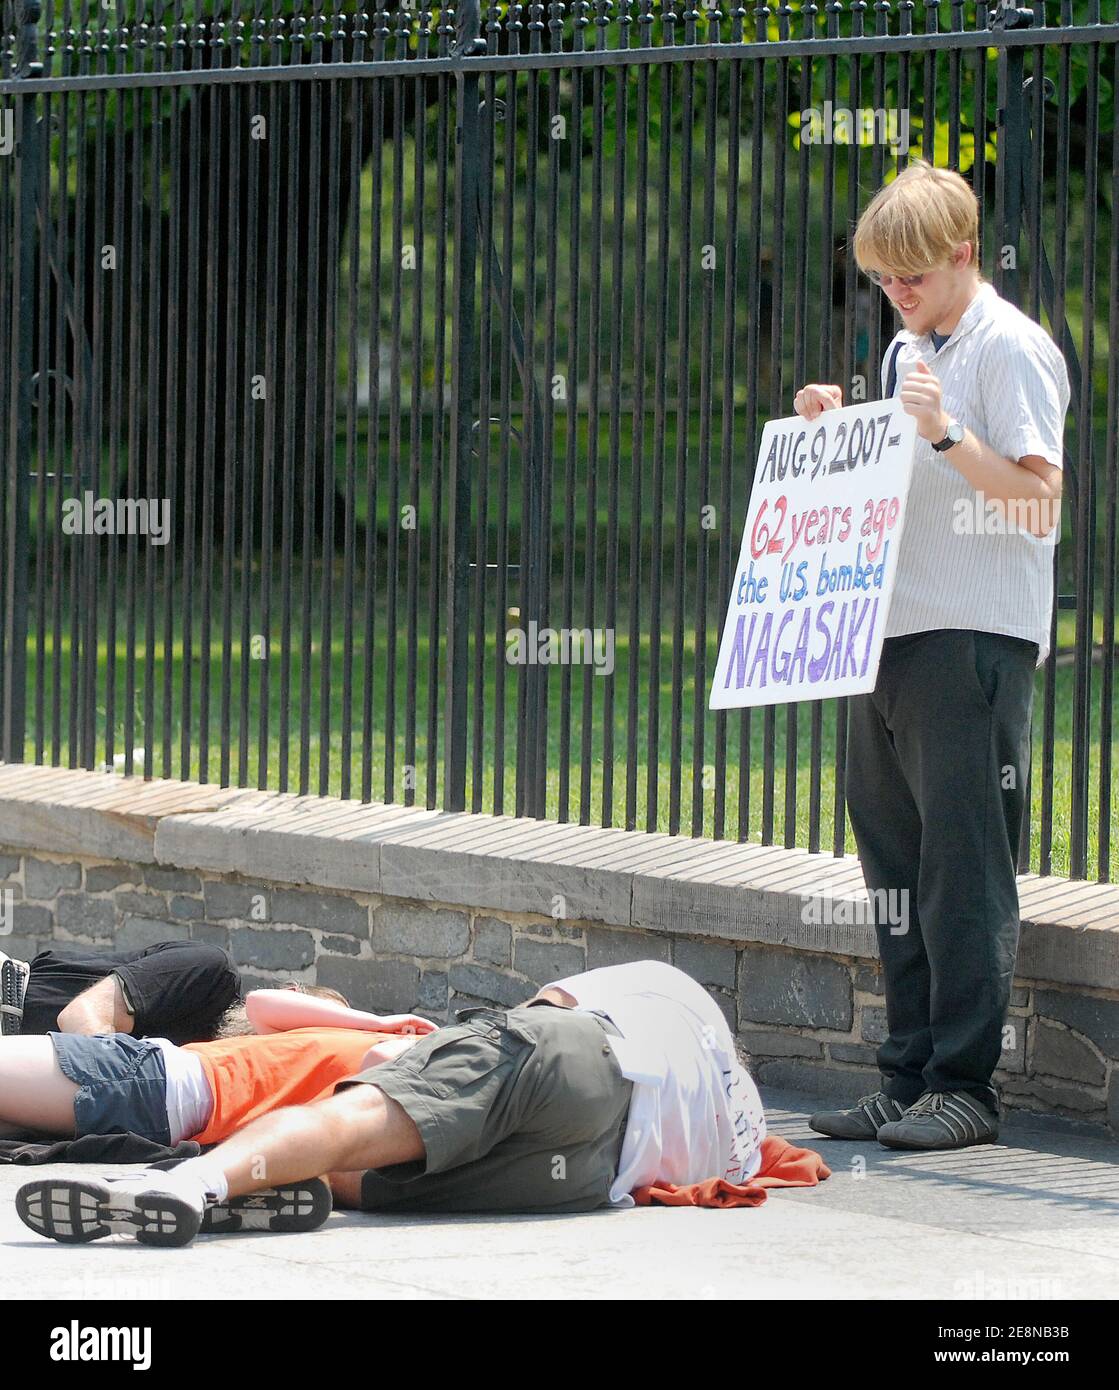 Peace activists commemorate anniversaries of the U.S. atomic bombings of Hiroshima and Nagasaki in front of the White House, in Washington, DC, USA, on August 9, 2007. Nagasaki was struck by an atomic bomb on August 9, 1945. Photo by Olivier Douliery/ABACAPRESS.COM Stock Photo